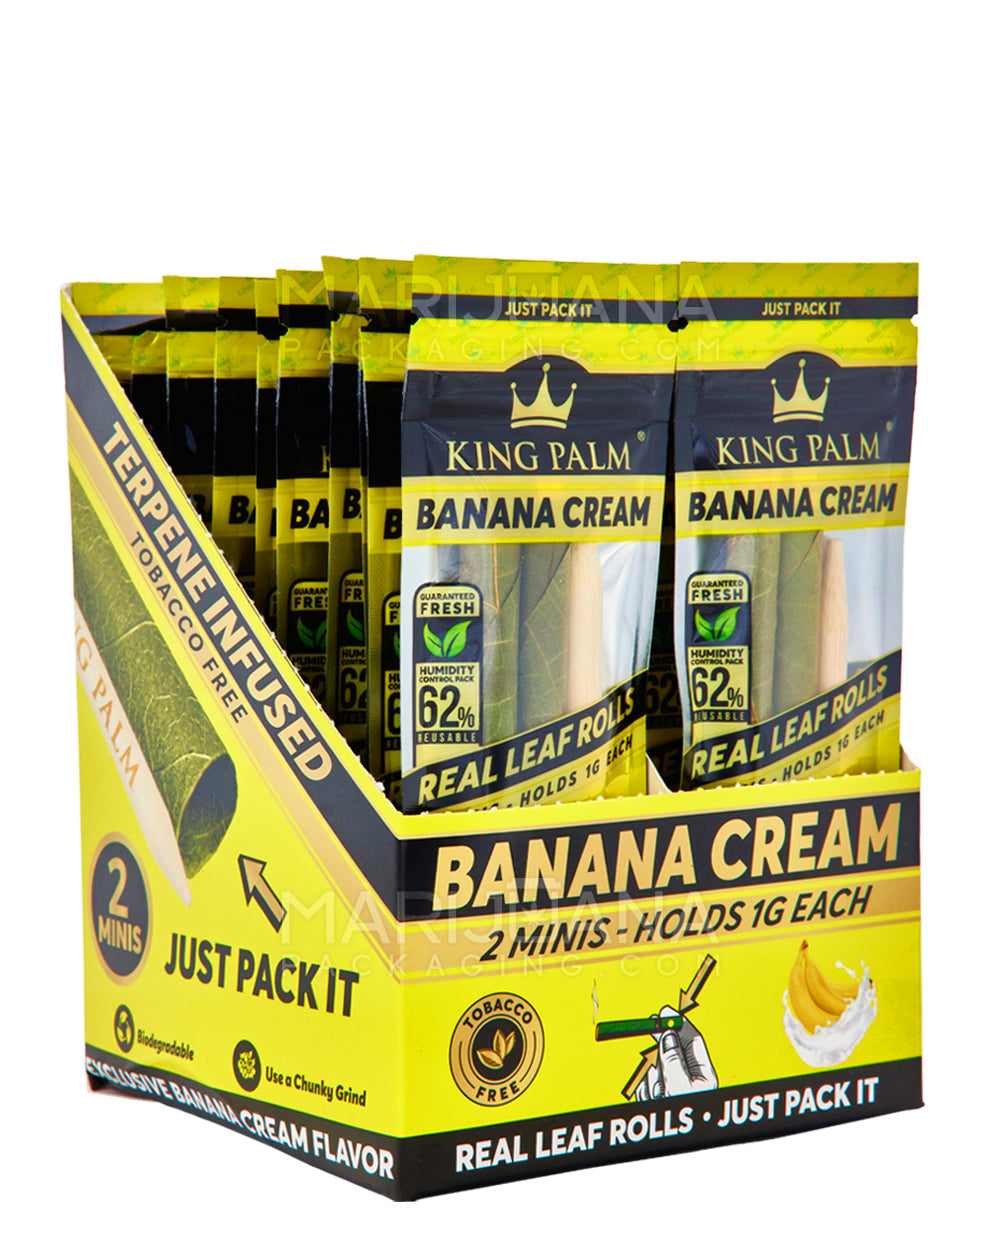 KING PALM | 'Retail Display' Natural Leaf Mini Rolls Blunt Wraps | 85mm - Banana Cream - 20 Count - 1